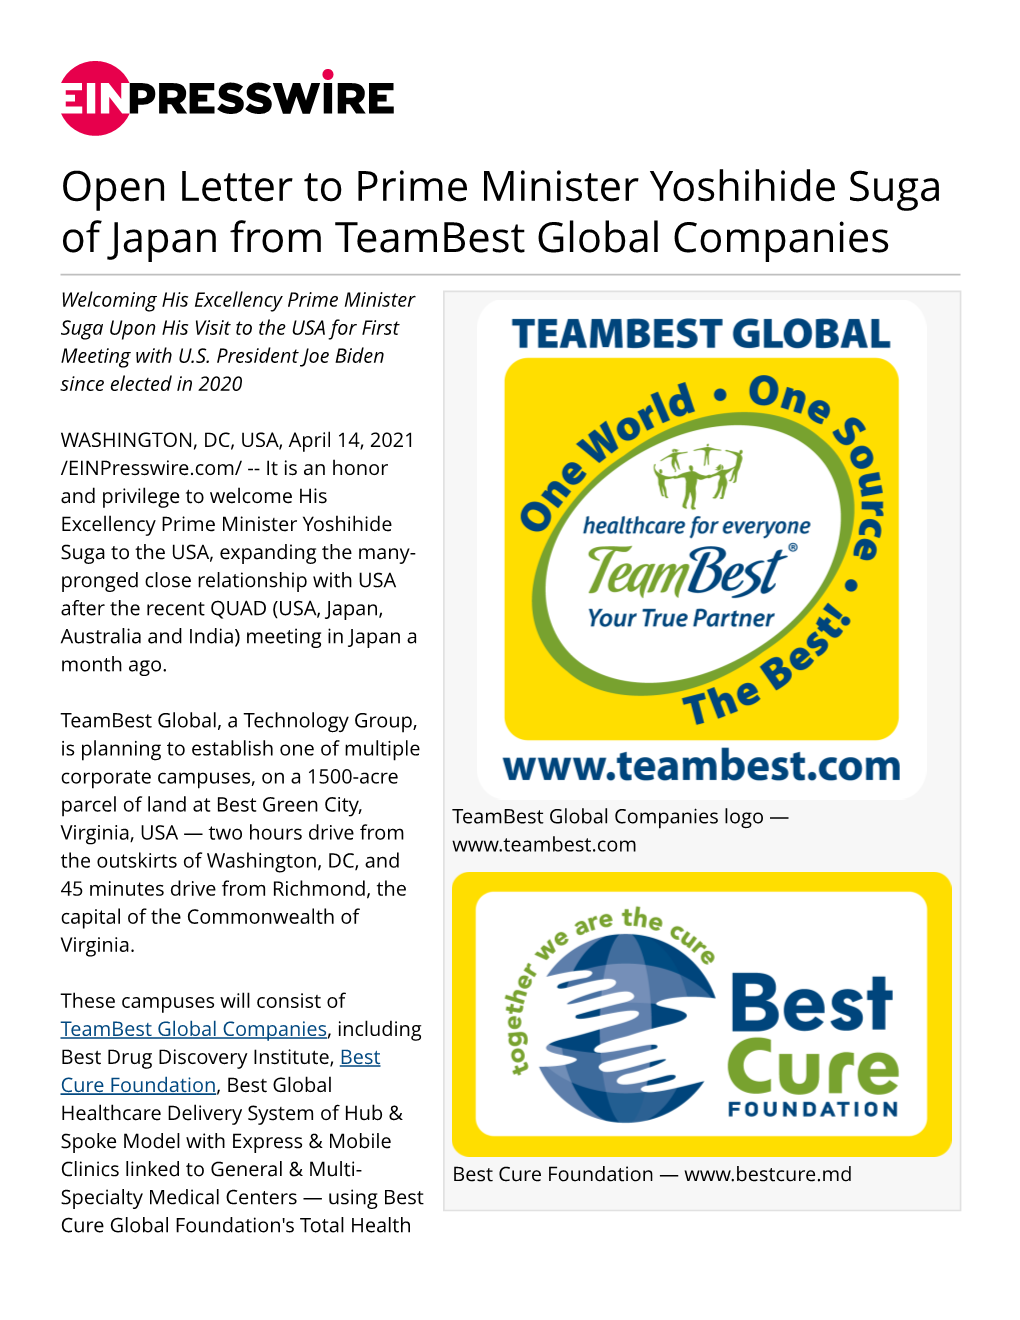 Open Letter to Prime Minister Yoshihide Suga of Japan from Teambest Global Companies